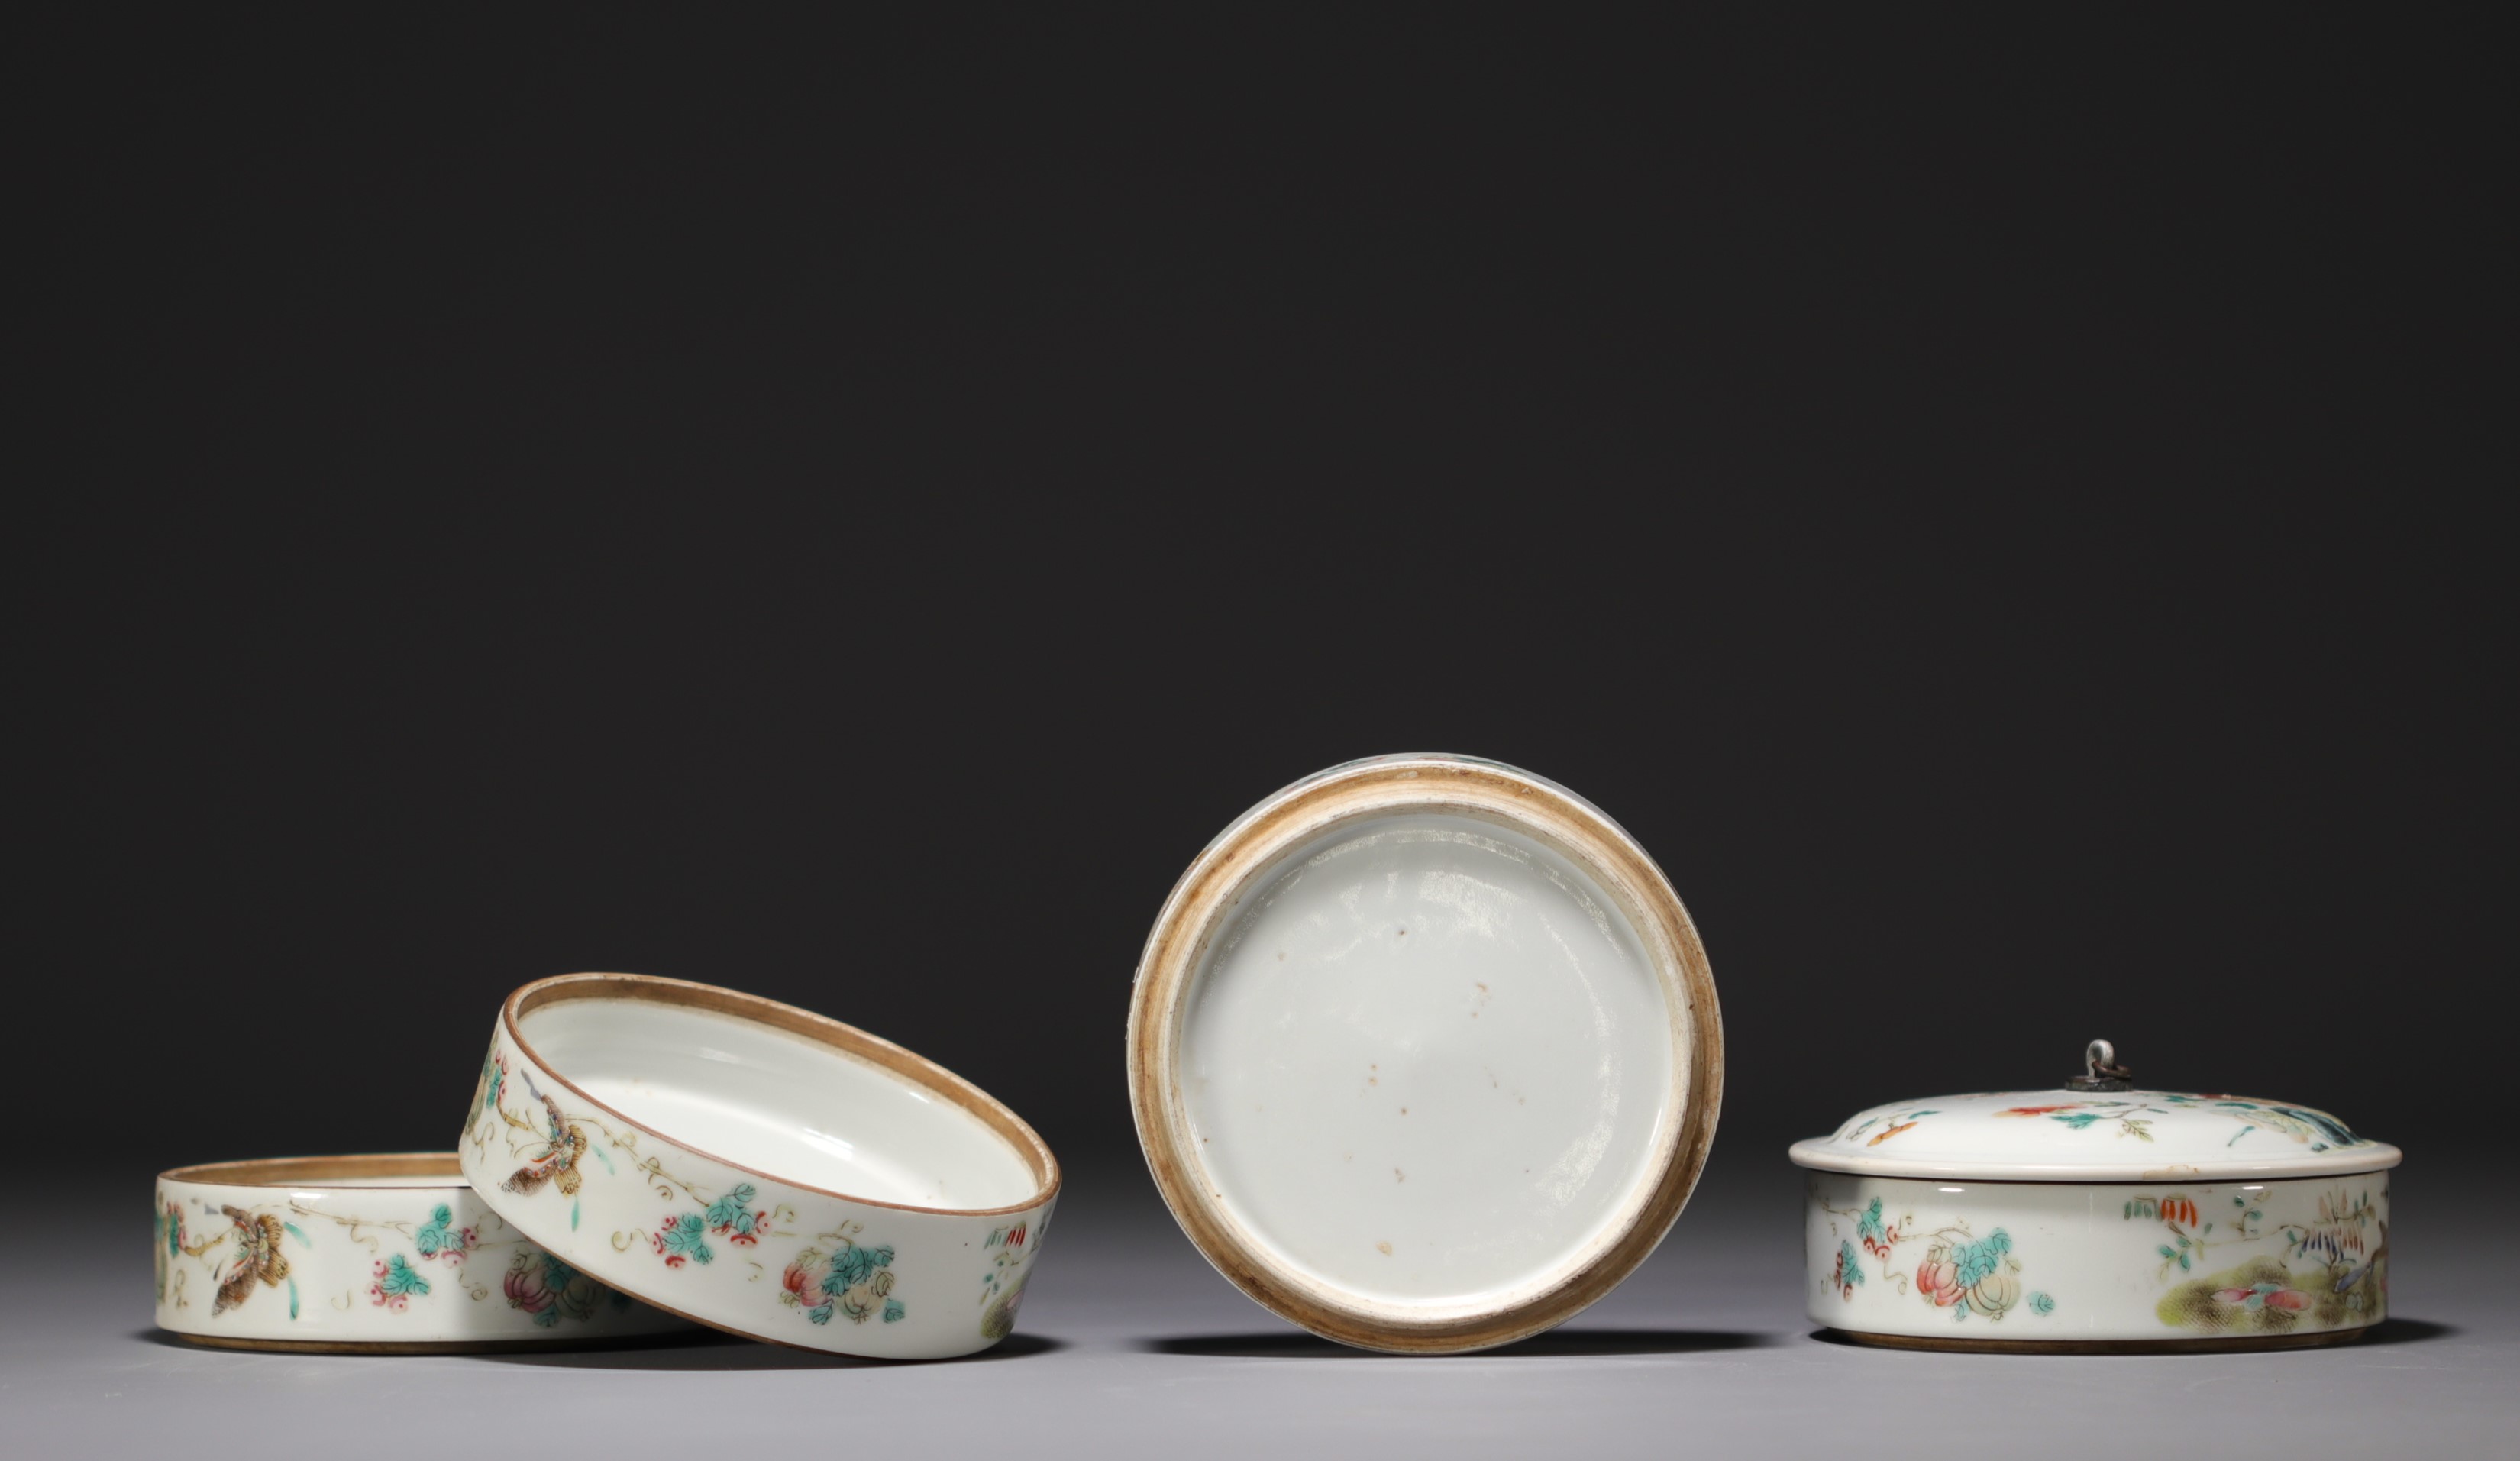 China - Set of four stacking condiment bowls decorated with flowers, famille rose. - Image 6 of 6